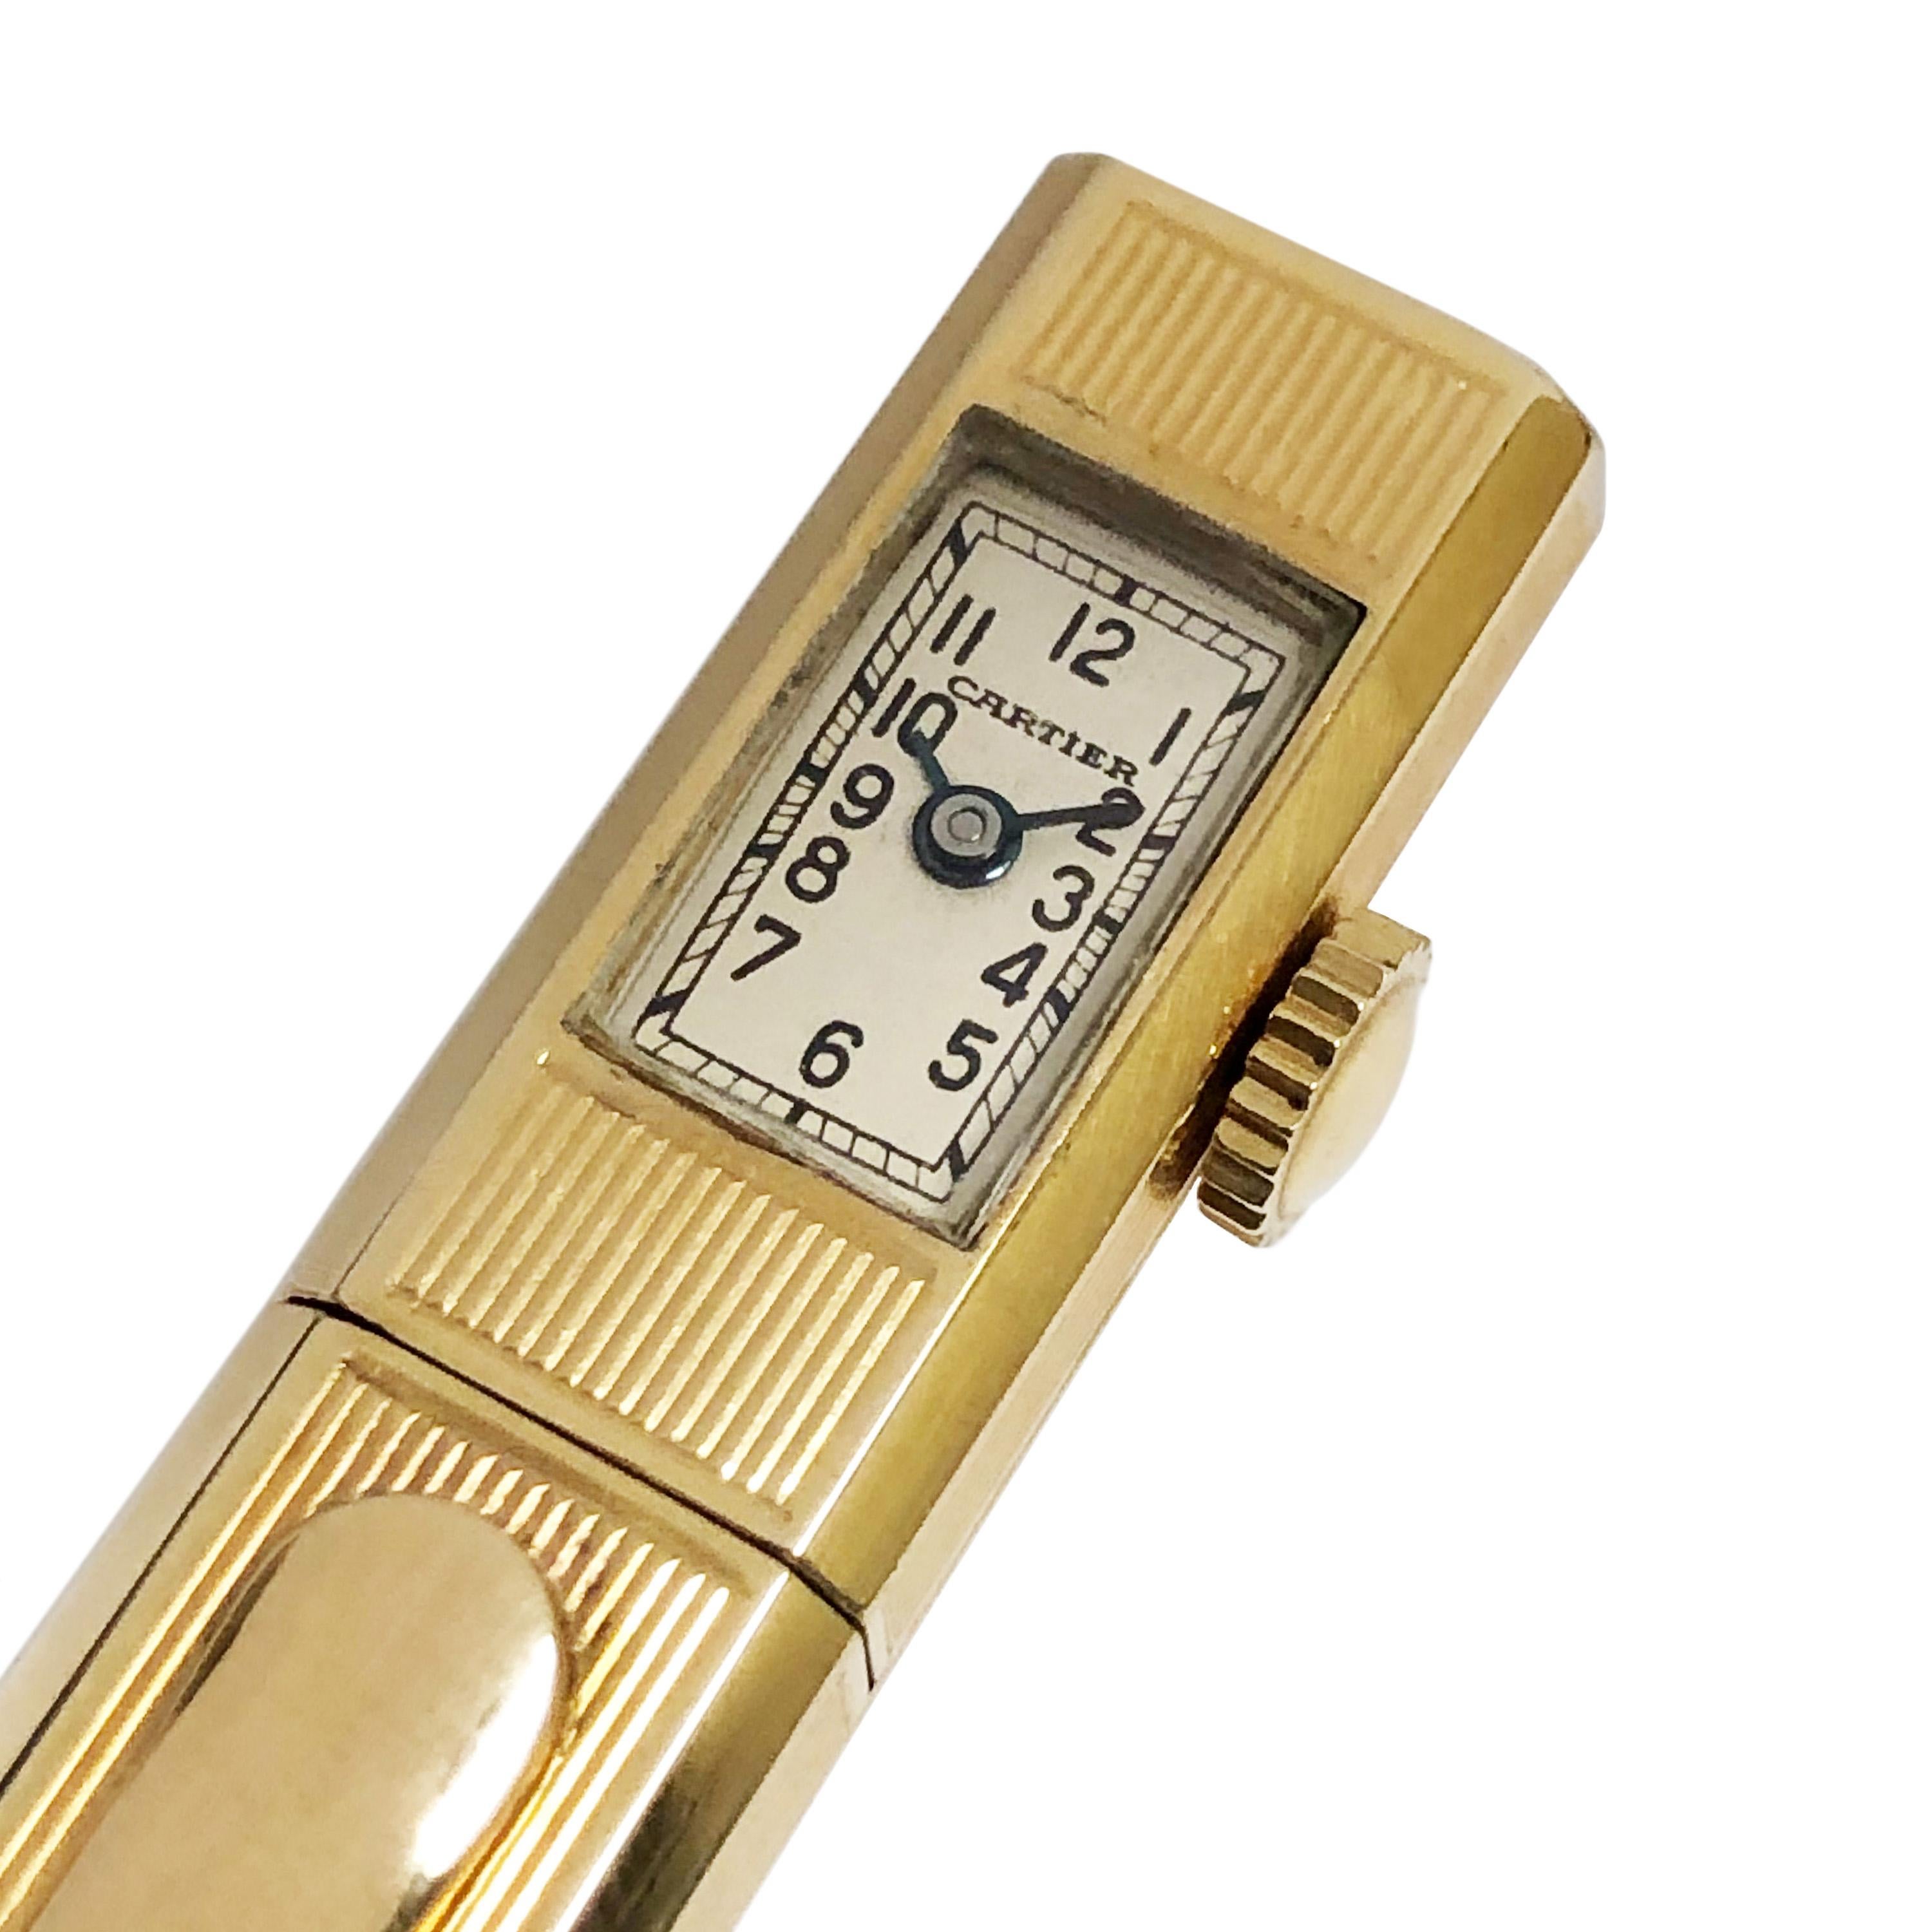 Circa 1940s Cartier 14K Yellow Gold Pencil, Watch measuring 5 1/8 inches in length and 7/16 inch wide, having an engraved ribbed design with Pocket clip. 17 jewel mechanical, manual wind Perry Watch Co. Movement, white dial with Black Arabic